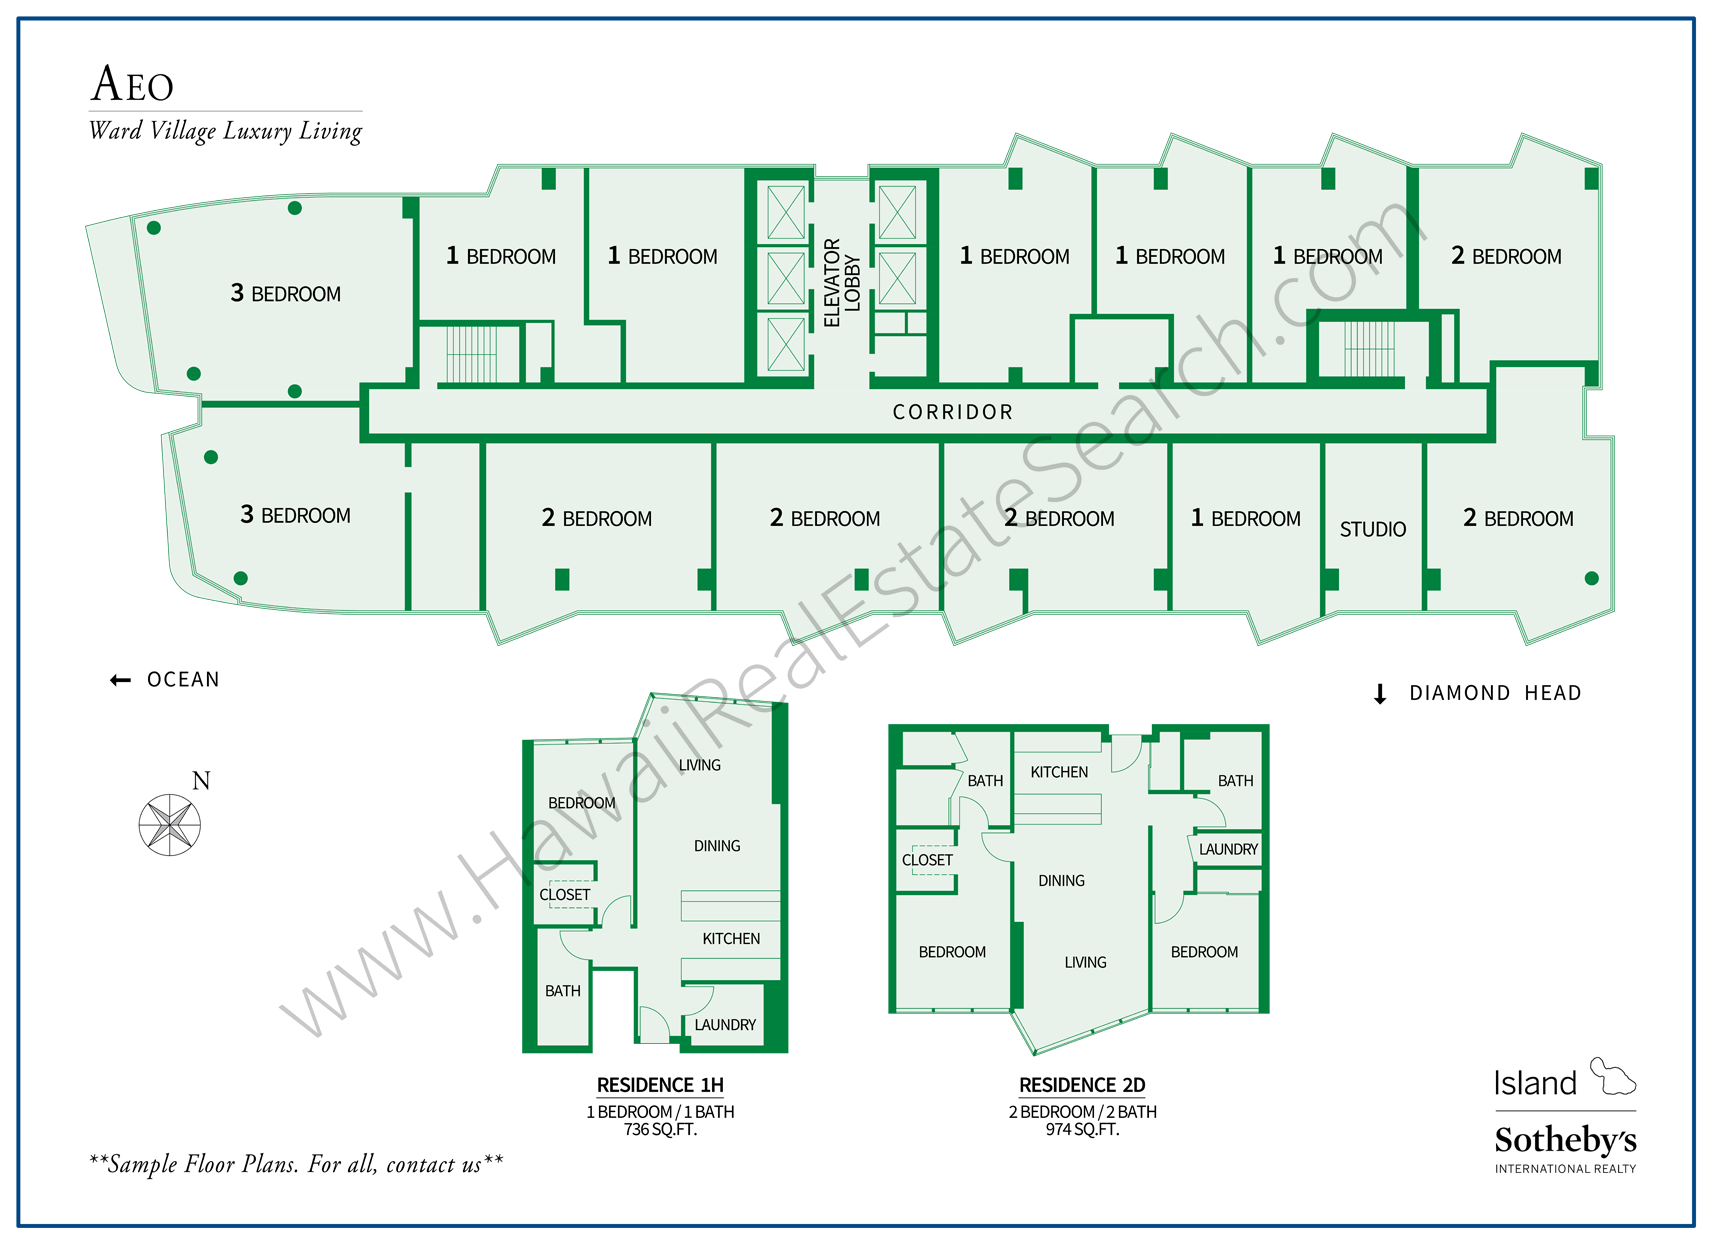 aeo map and floor plans